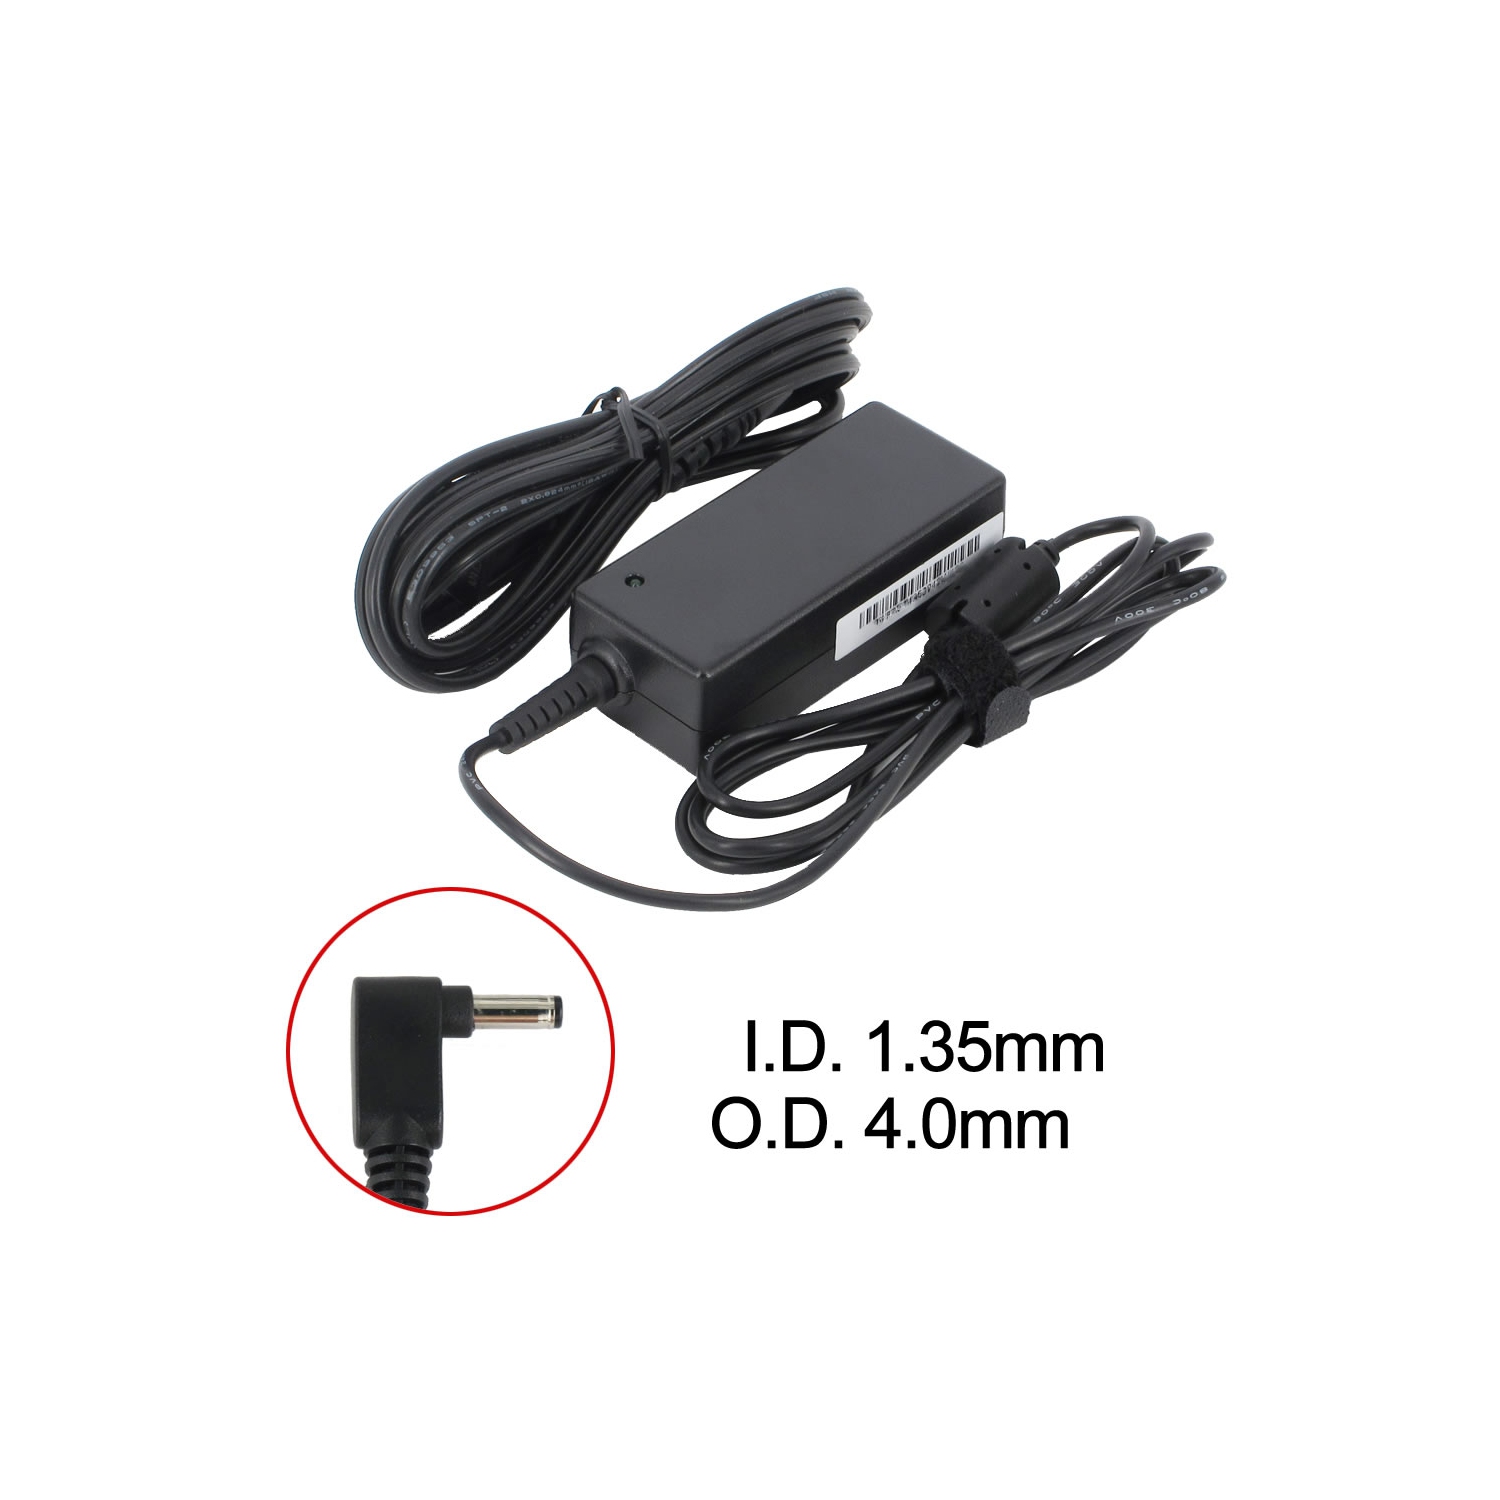 BattDepot: New Laptop AC Adapter for Asus VivoBook X541NA, 0A001-00230400, 0A001-00330100, EXA1206EH